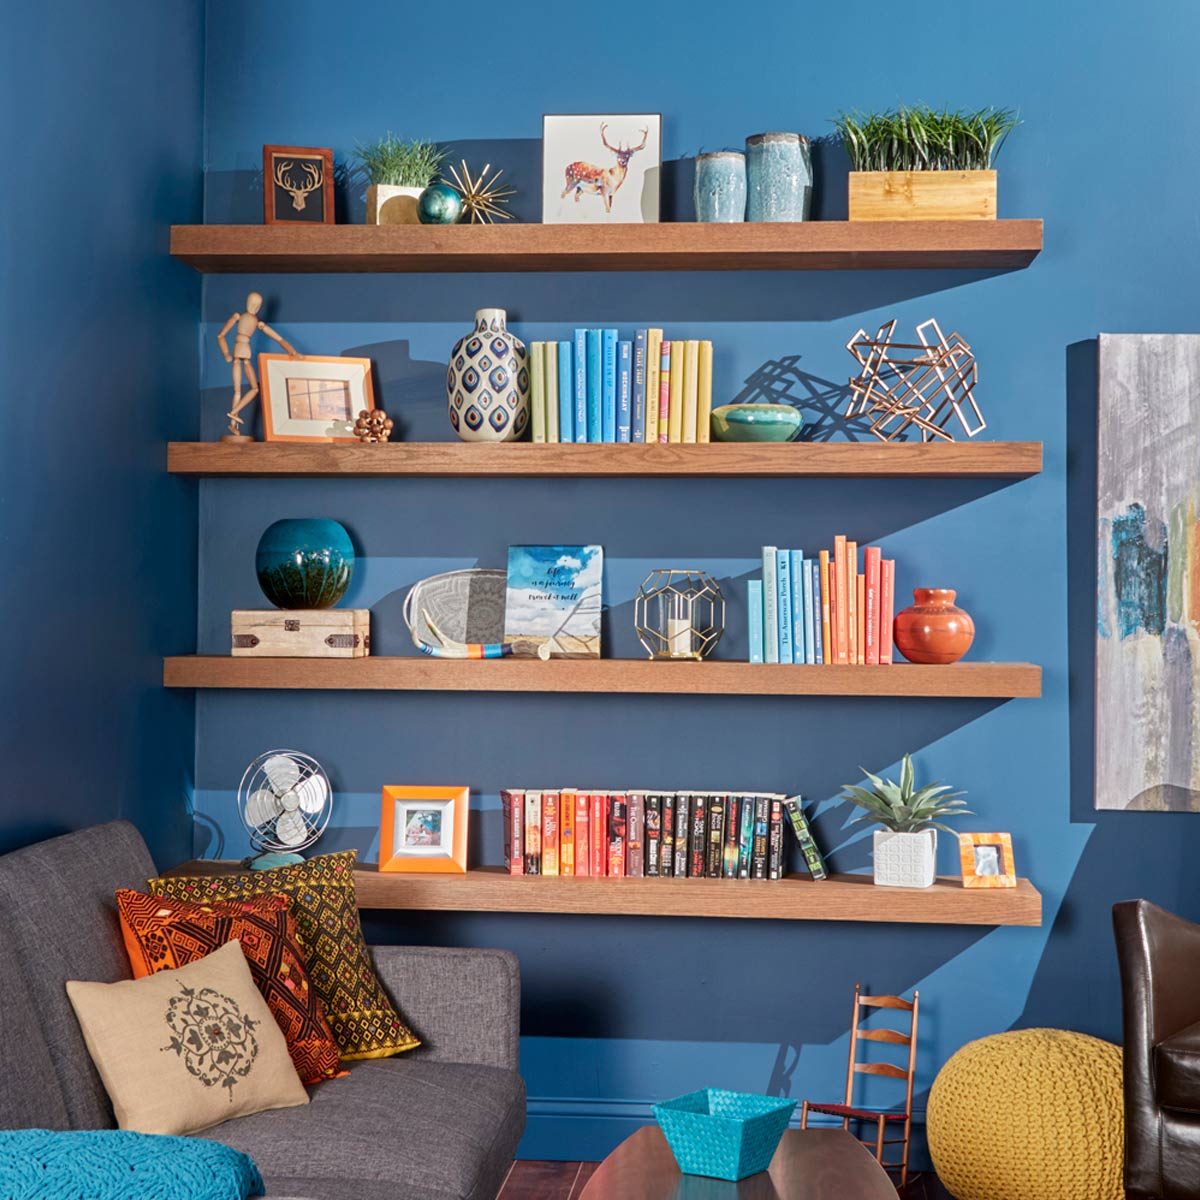 How To Build Floating Shelves — The Family Handyman